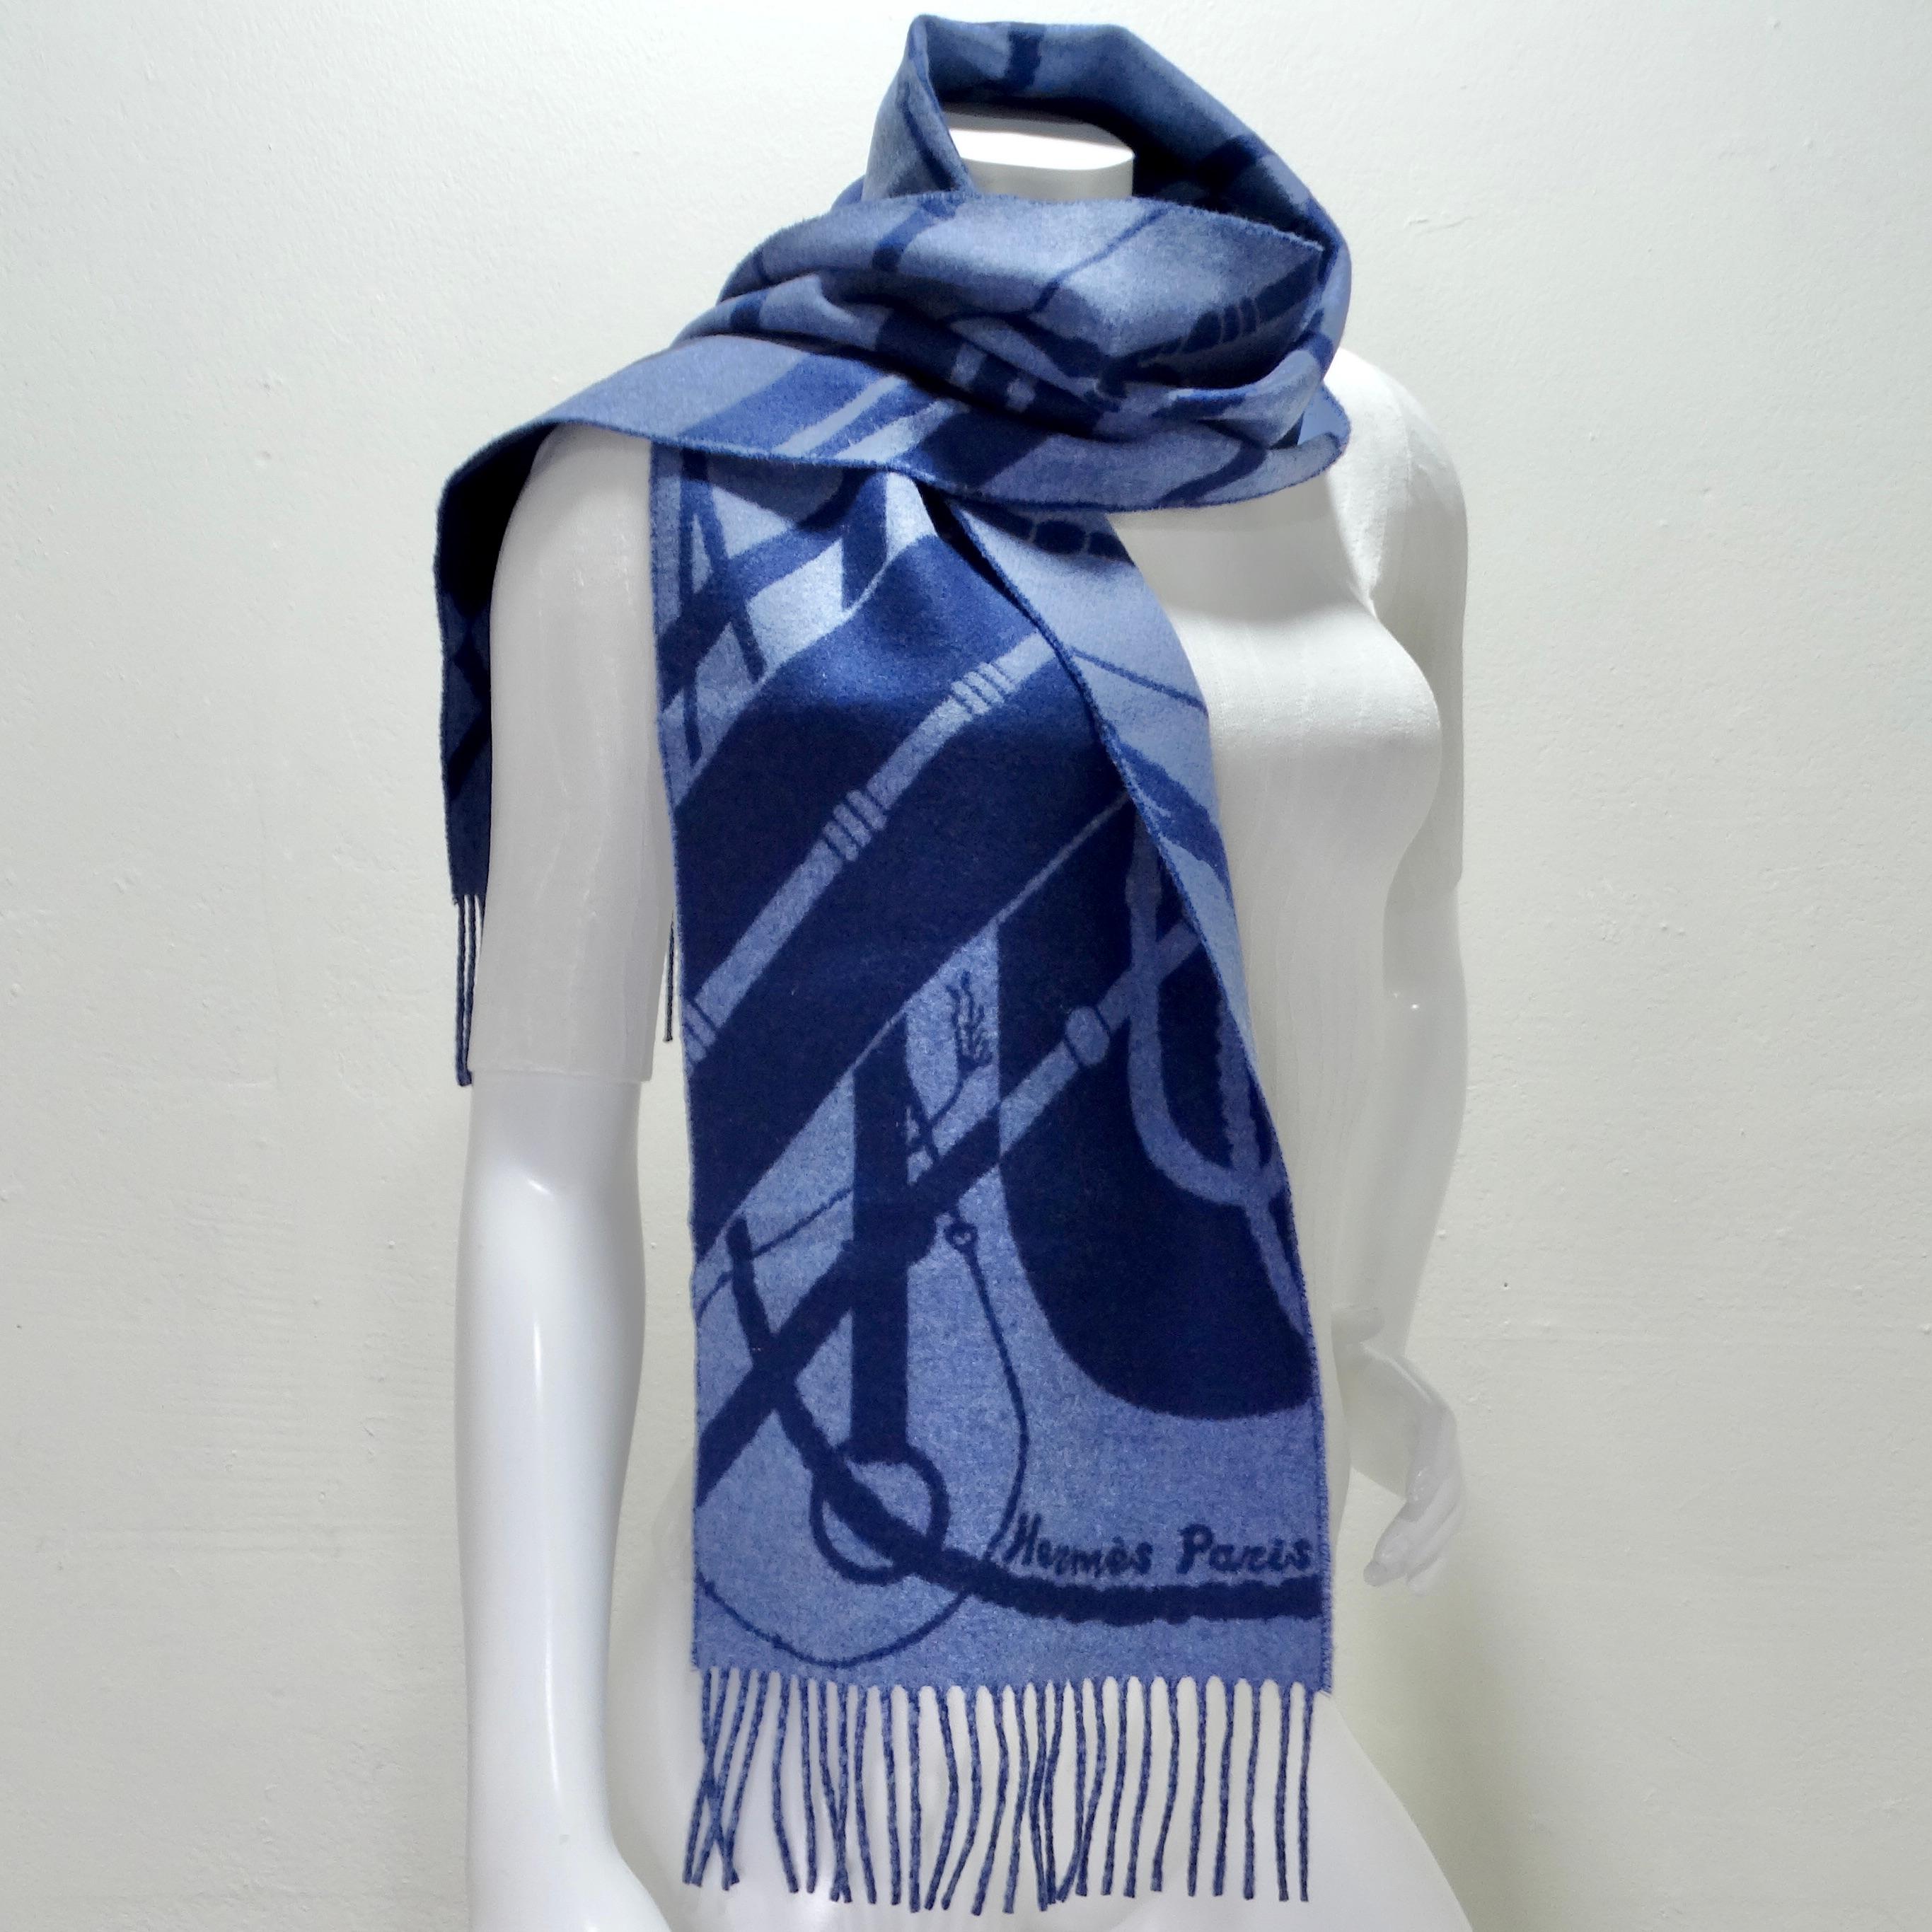 Introducing the Hermes Blue Cashmere Scarf, a luxurious and versatile accessory that adds a vibrant touch to any outfit. Made from the finest cashmere, this scarf boasts a stunning two-tone design with a combination of navy blue and baby blue in a